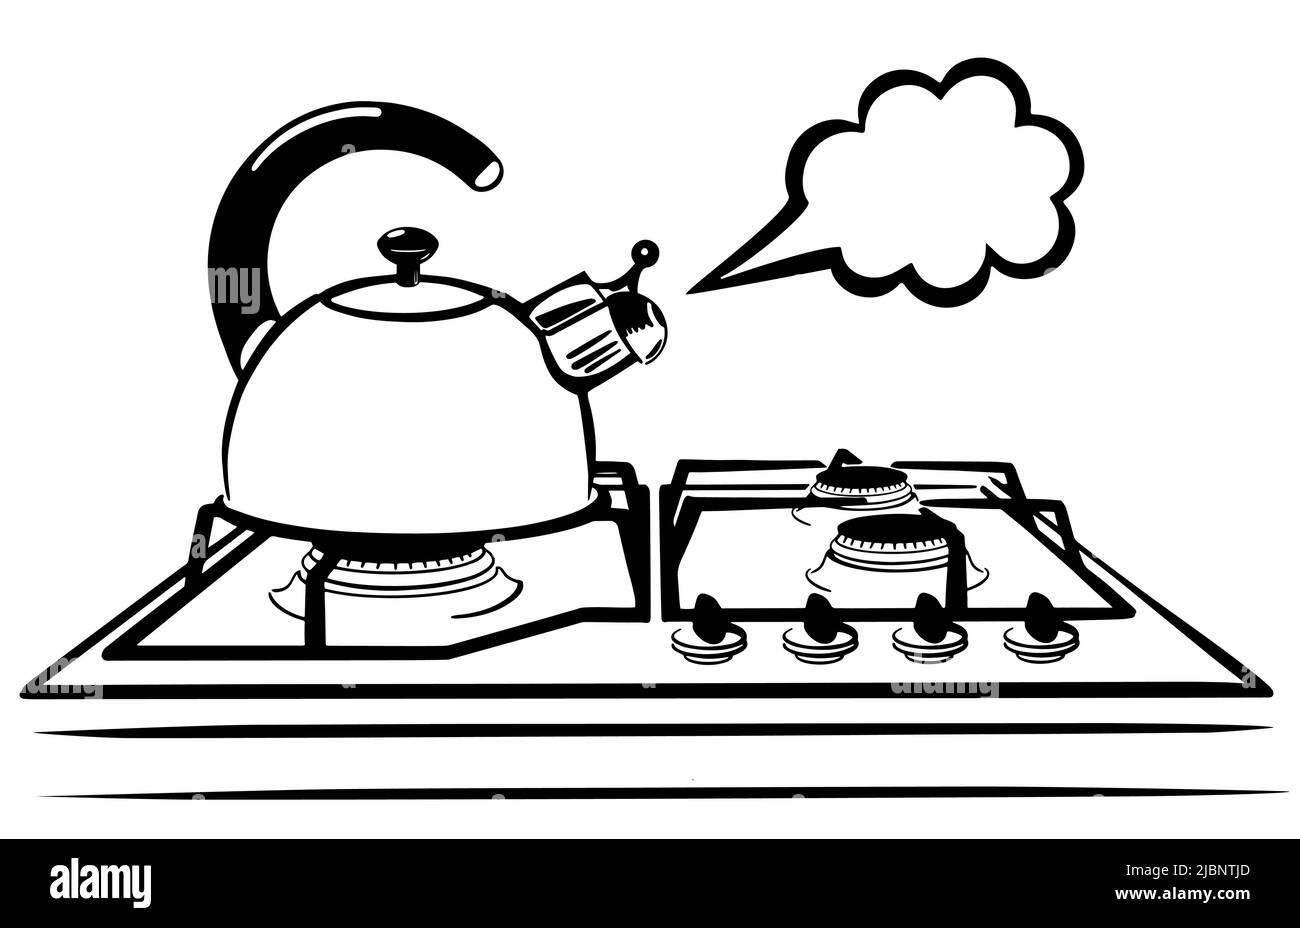 Gas stove with kettle and whistle. Steam cloud. The sketch is hand drawn. Isolated on white background. Vector. Stock Vector